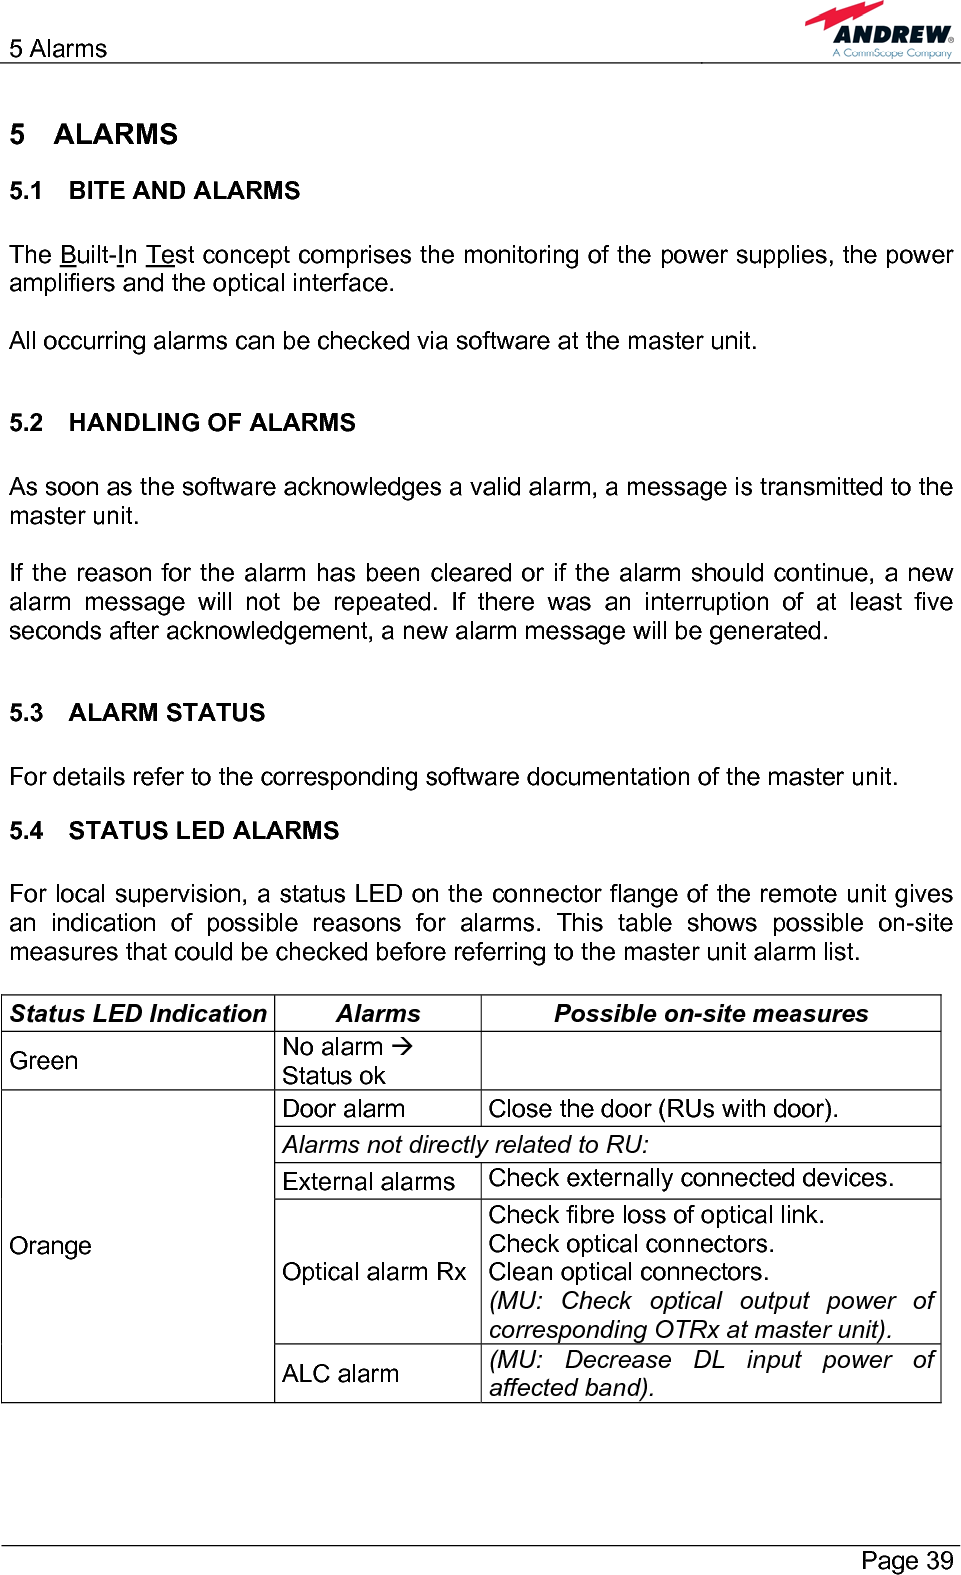 5 Alarms       Page 39 5 ALARMS 5.1 BITE AND ALARMS  The Built-In Test concept comprises the monitoring of the power supplies, the power amplifiers and the optical interface.  All occurring alarms can be checked via software at the master unit.  5.2  HANDLING OF ALARMS  As soon as the software acknowledges a valid alarm, a message is transmitted to the master unit.  If the reason for the alarm has been cleared or if the alarm should continue, a new alarm message will not be repeated. If there was an interruption of at least five seconds after acknowledgement, a new alarm message will be generated.  5.3 ALARM STATUS  For details refer to the corresponding software documentation of the master unit. 5.4  STATUS LED ALARMS  For local supervision, a status LED on the connector flange of the remote unit gives an indication of possible reasons for alarms. This table shows possible on-site measures that could be checked before referring to the master unit alarm list.  Status LED Indication  Alarms  Possible on-site measures Green  No alarm Æ Status ok   Door alarm  Close the door (RUs with door). Alarms not directly related to RU:  External alarms  Check externally connected devices. Optical alarm Rx Check fibre loss of optical link. Check optical connectors. Clean optical connectors. (MU: Check optical output power of corresponding OTRx at master unit). Orange ALC alarm  (MU: Decrease DL input power of affected band). 